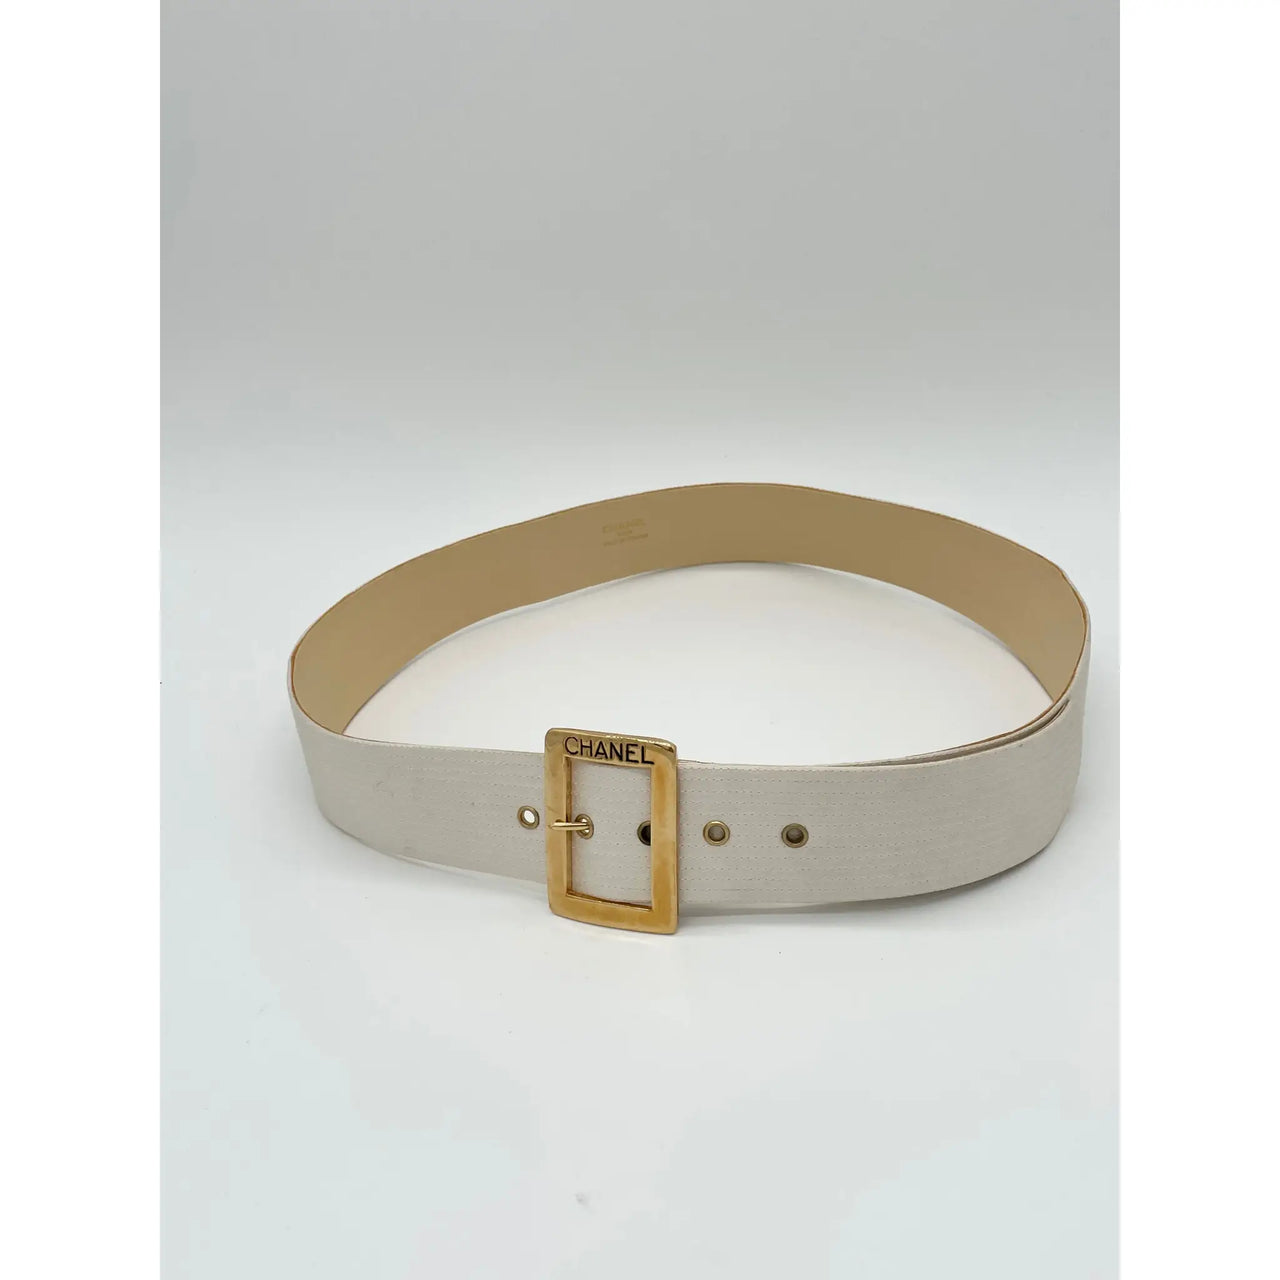 Chanel - Authenticated Belt - Leather White for Women, Good Condition